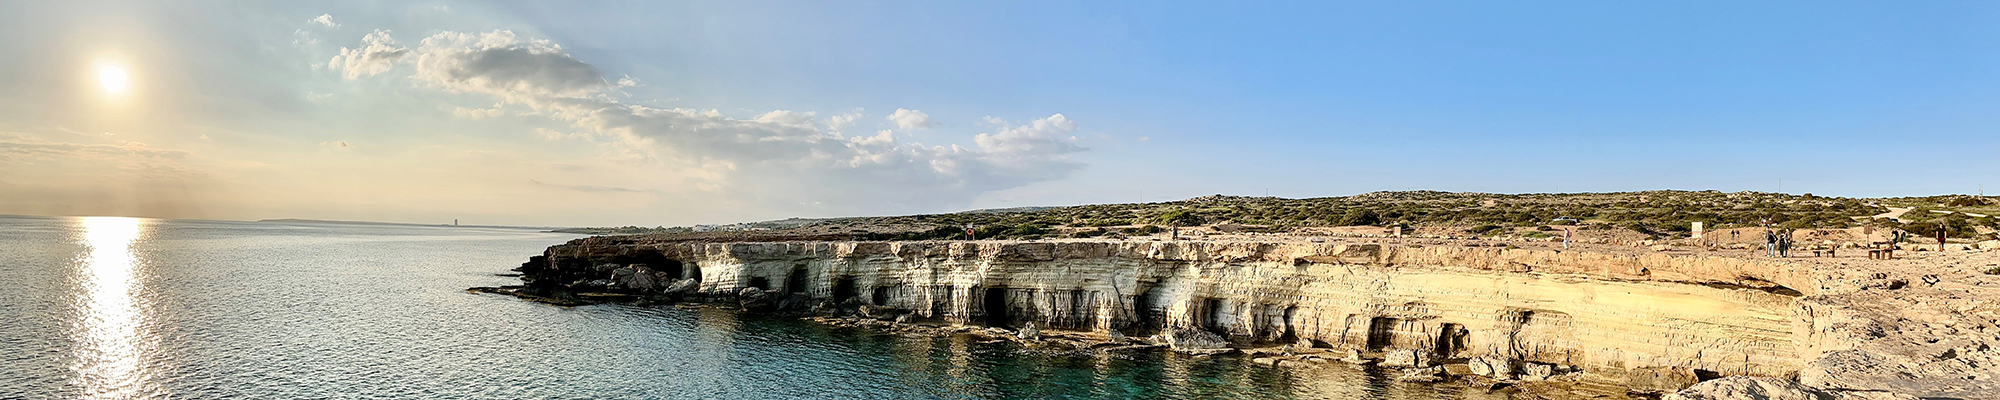 private guide Cyprus-private zours cyprus-10 best places in Cyprus-cape greco sea caves